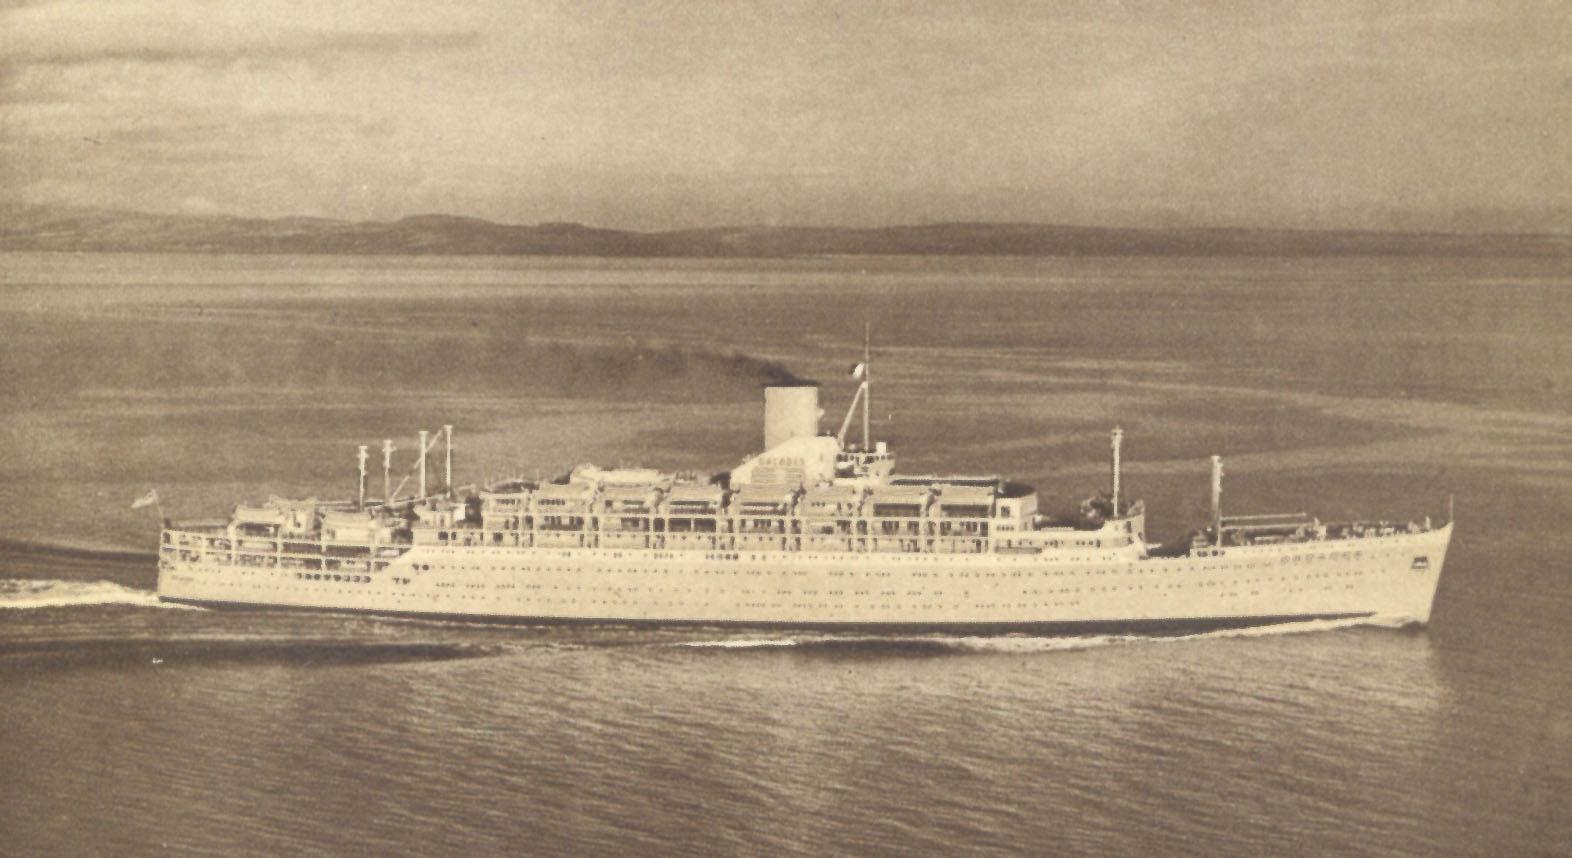 Passenger Liner "Orcades", built by Vickers Armstrongs Ltd., Barrow-In-Furness, England.  Launched on 14 October 1947 by Lady Morshead and completed in November 1948.  Her inaugural voyage was from London - Sydney on 14 December 1948.
Base Port:  Initial